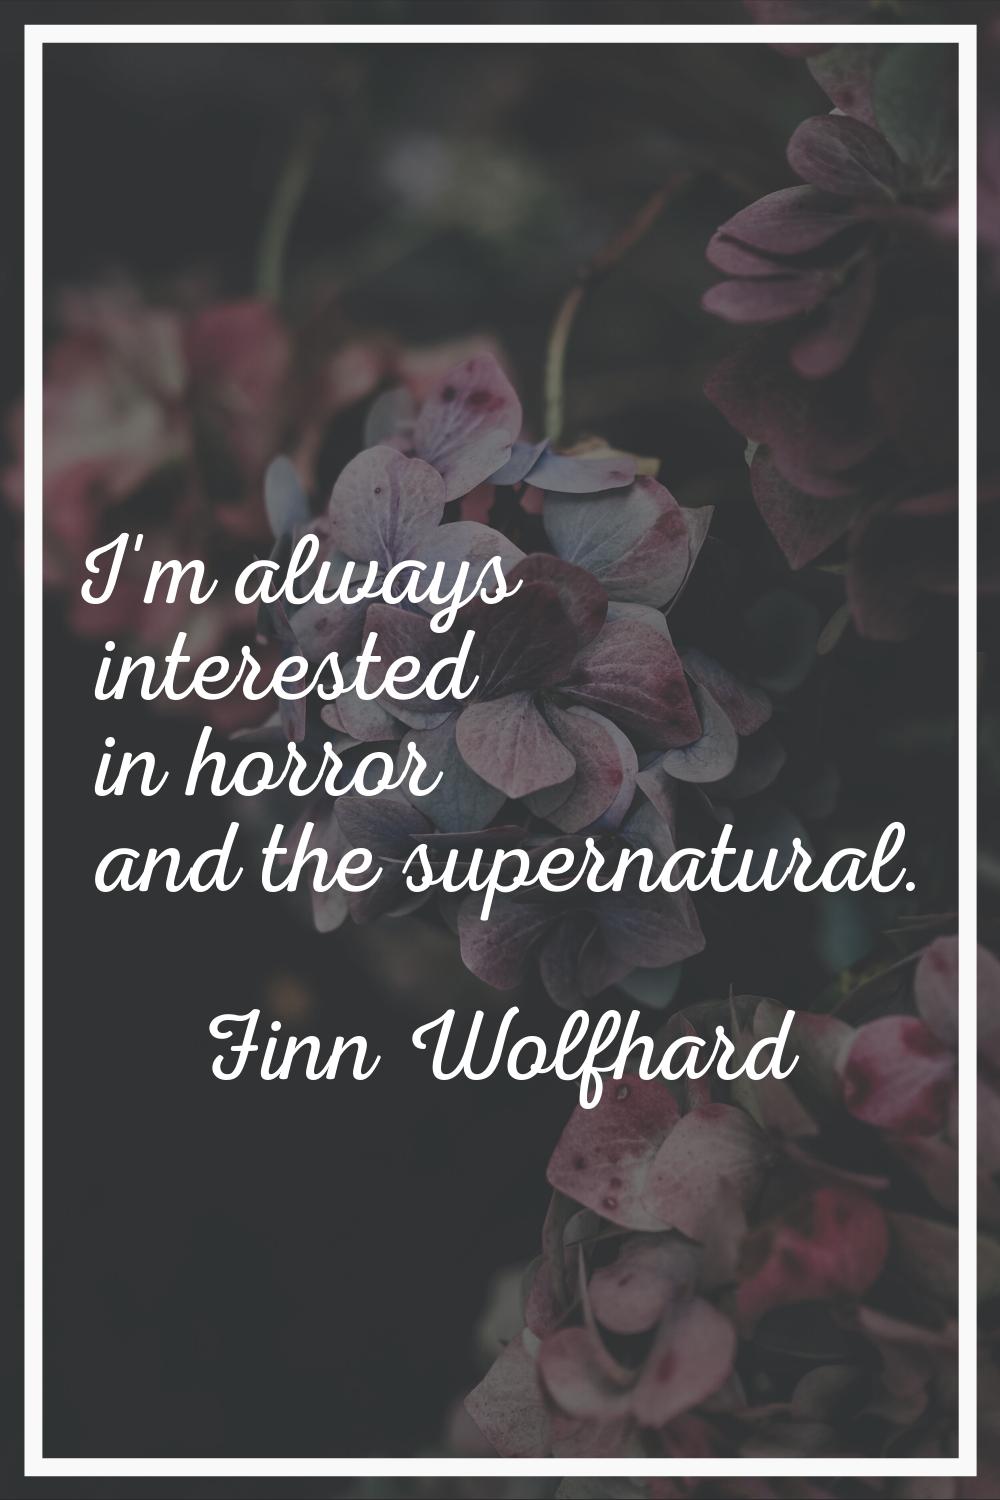 I'm always interested in horror and the supernatural.